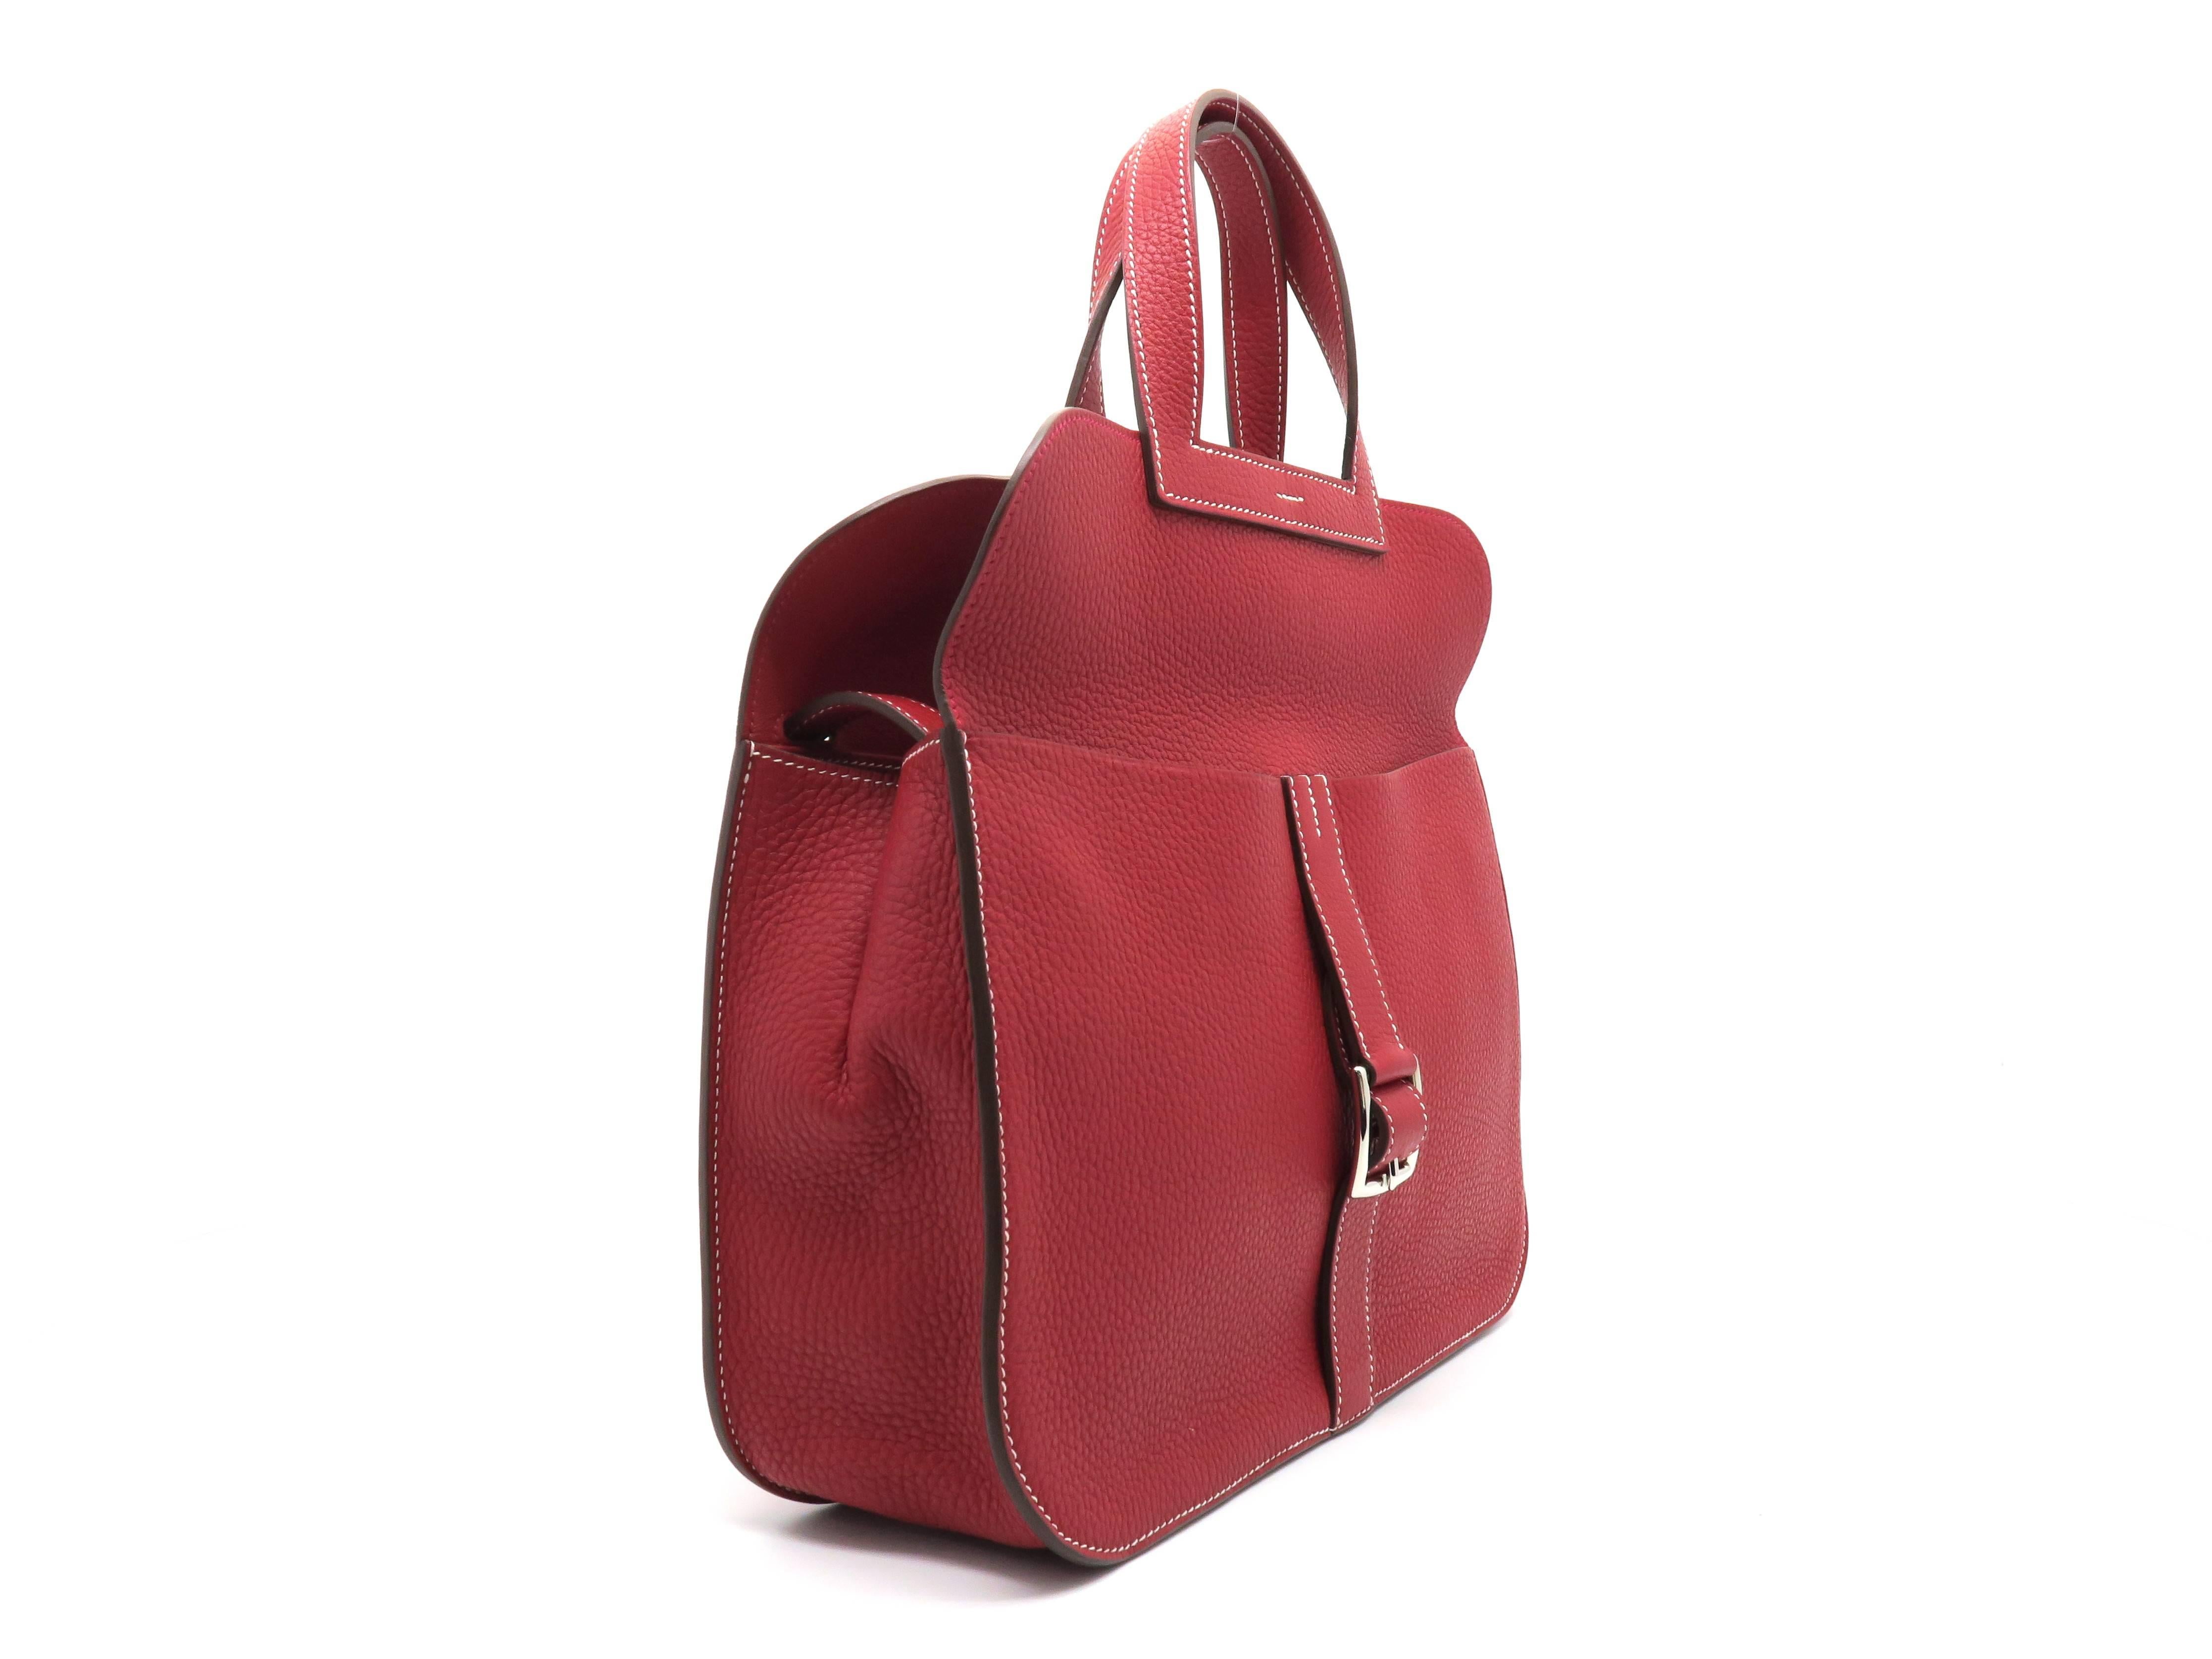 Color: Red / Rouge Casaque (designer color) 

Material: Clemence Leather 

Condition: Rank A 
Overall: Good, few minor defects.
Surface: Good
Corners: Good
Edges: Good 
Handles/Straps: Good
Hardware: Minor Scratches

Dimension: W31 × H20 ×